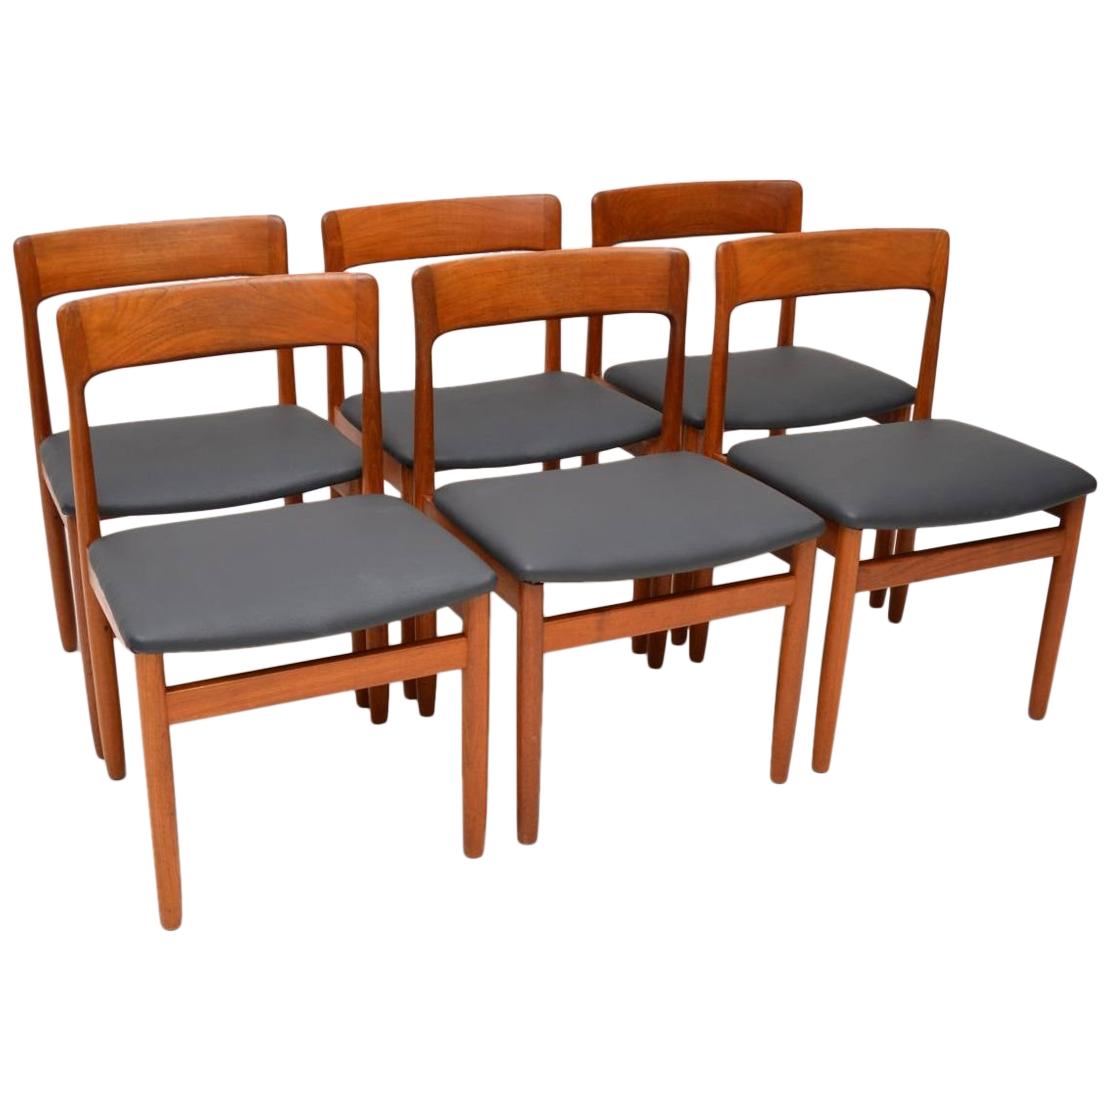 1960s Set of 6 Vintage Teak Dining Chairs by Younger